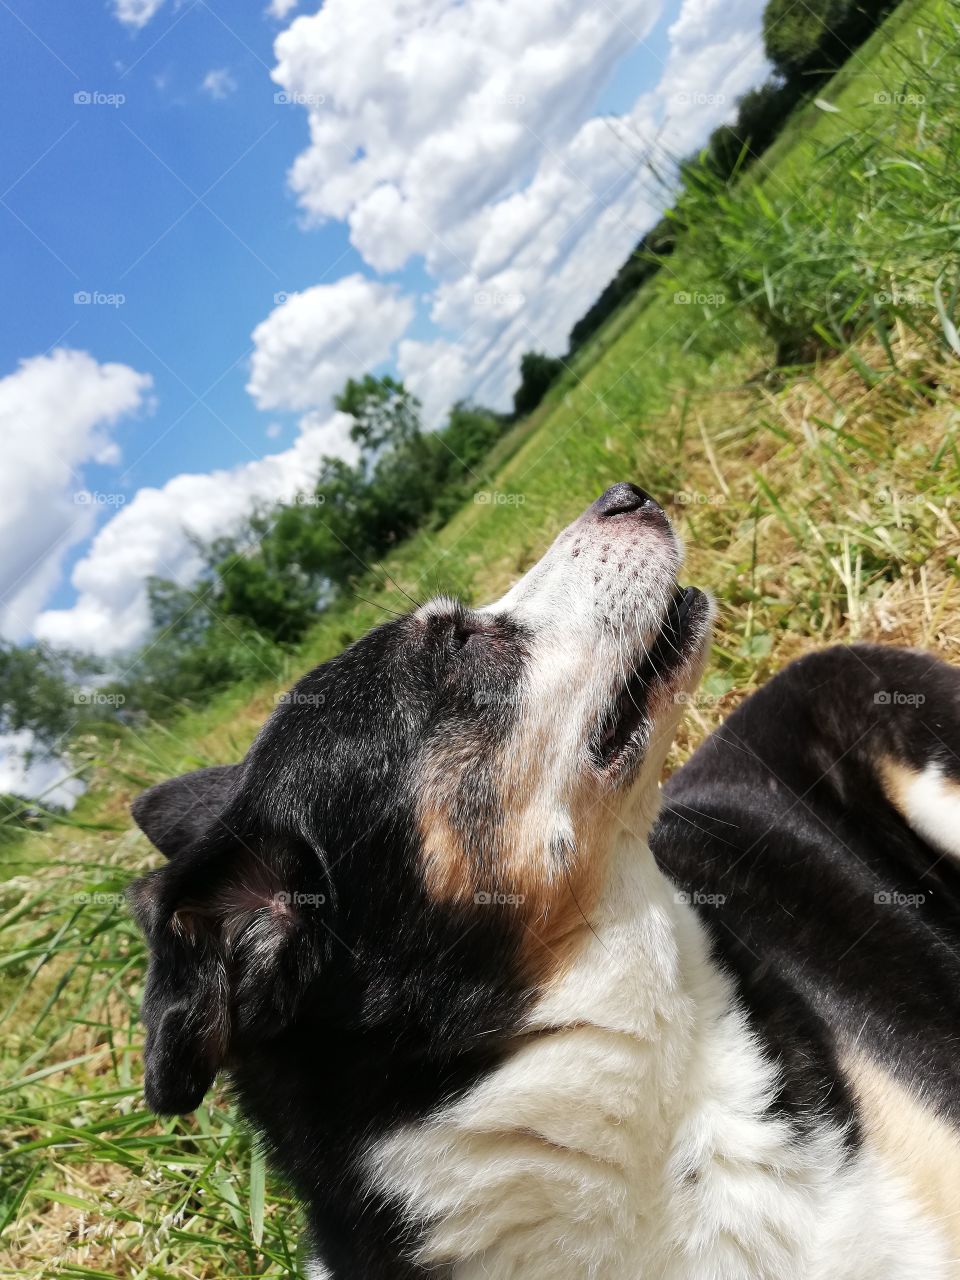 dog lying in a green field with blue sky